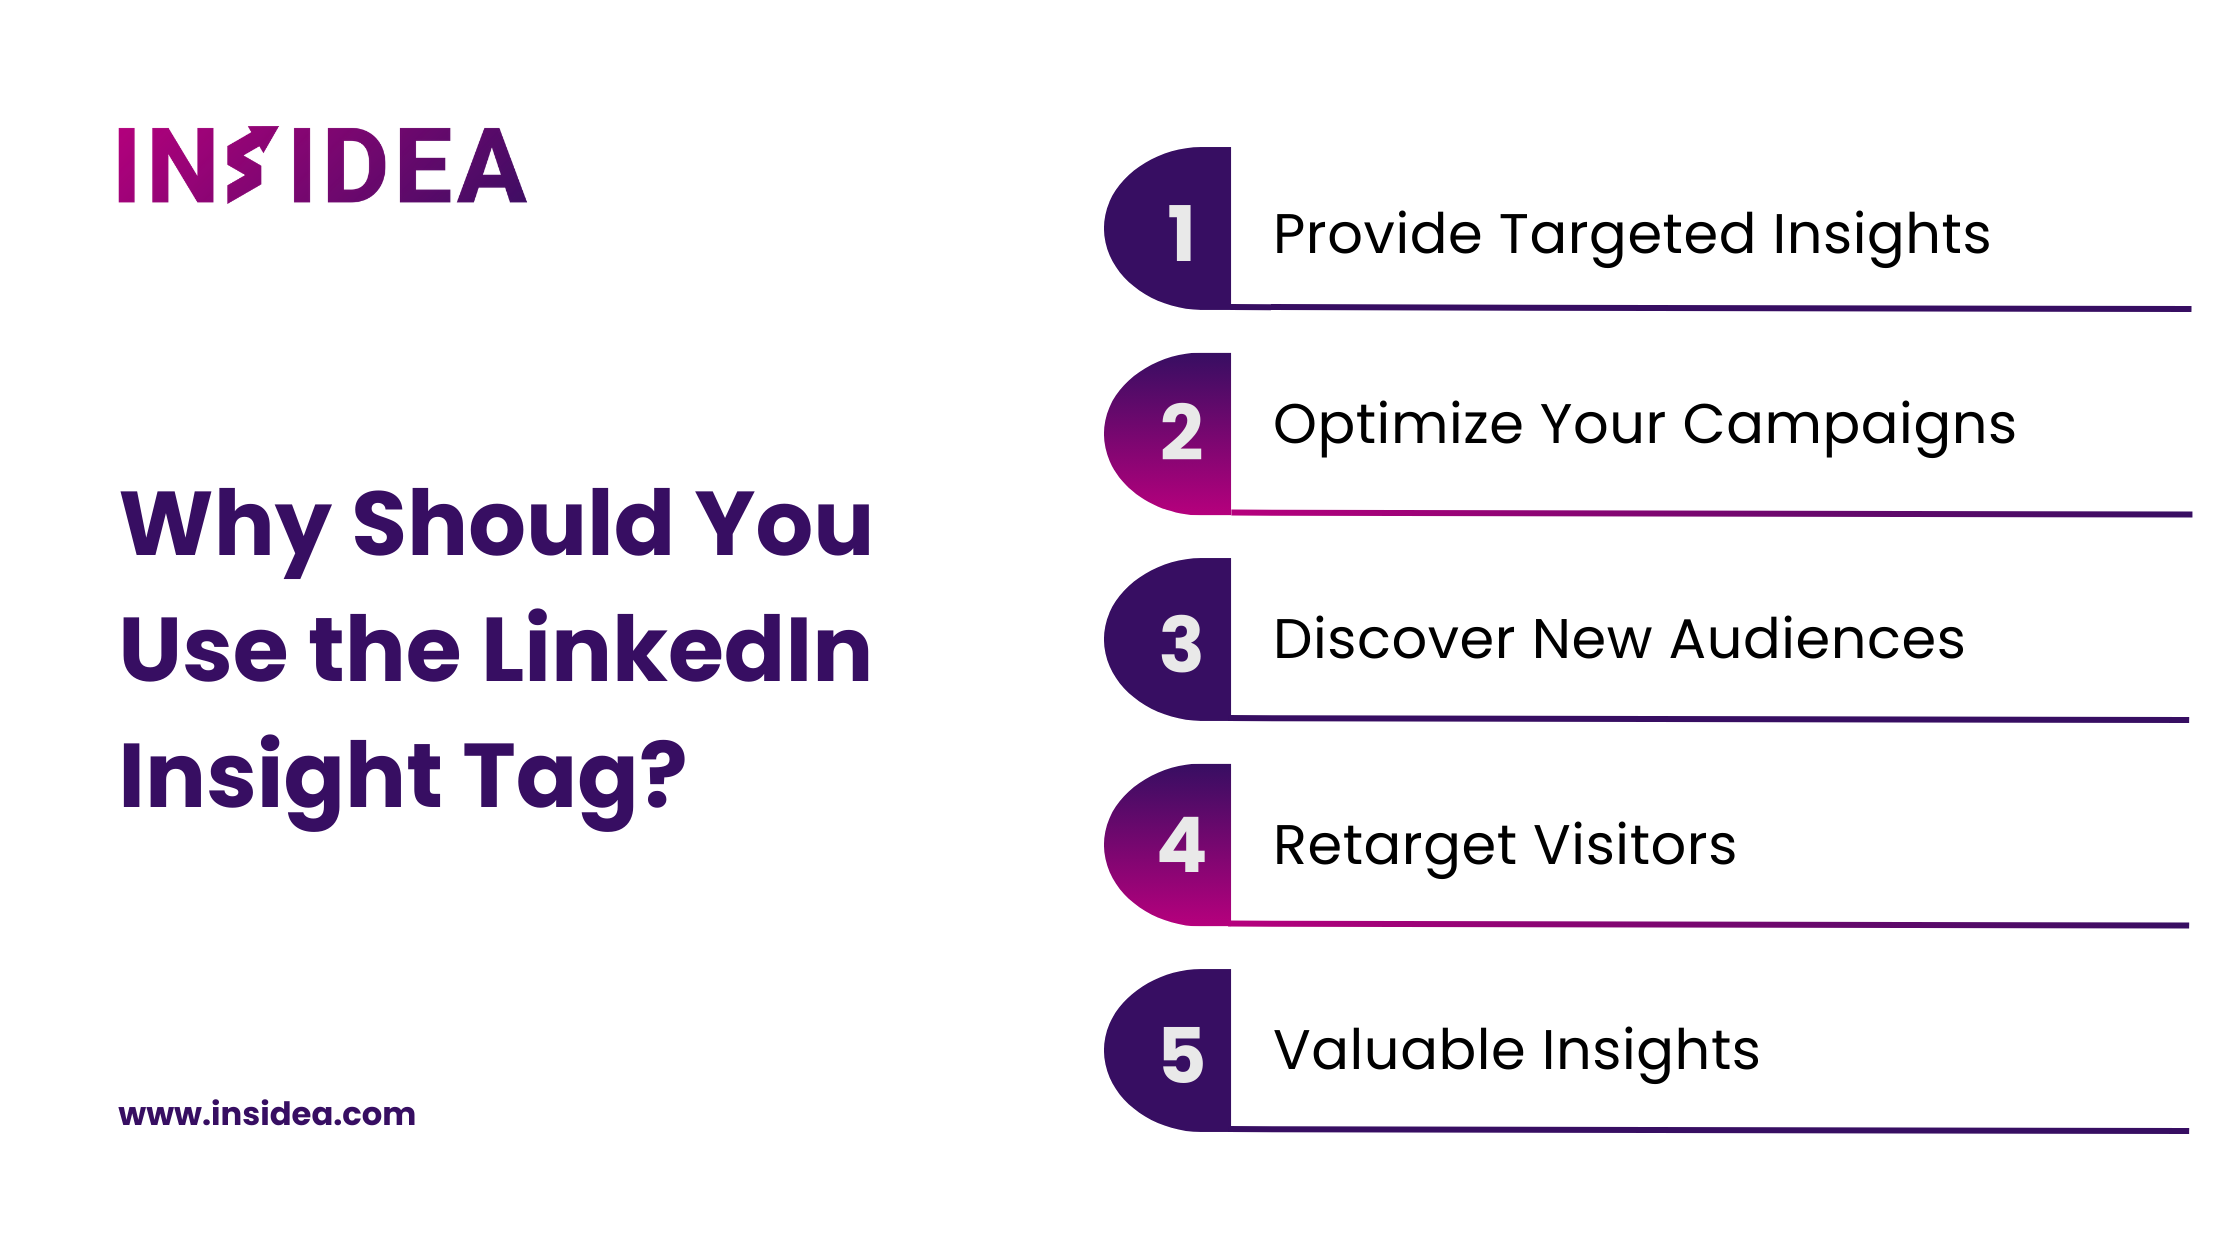 Why Should You Use the LinkedIn Insight Tag